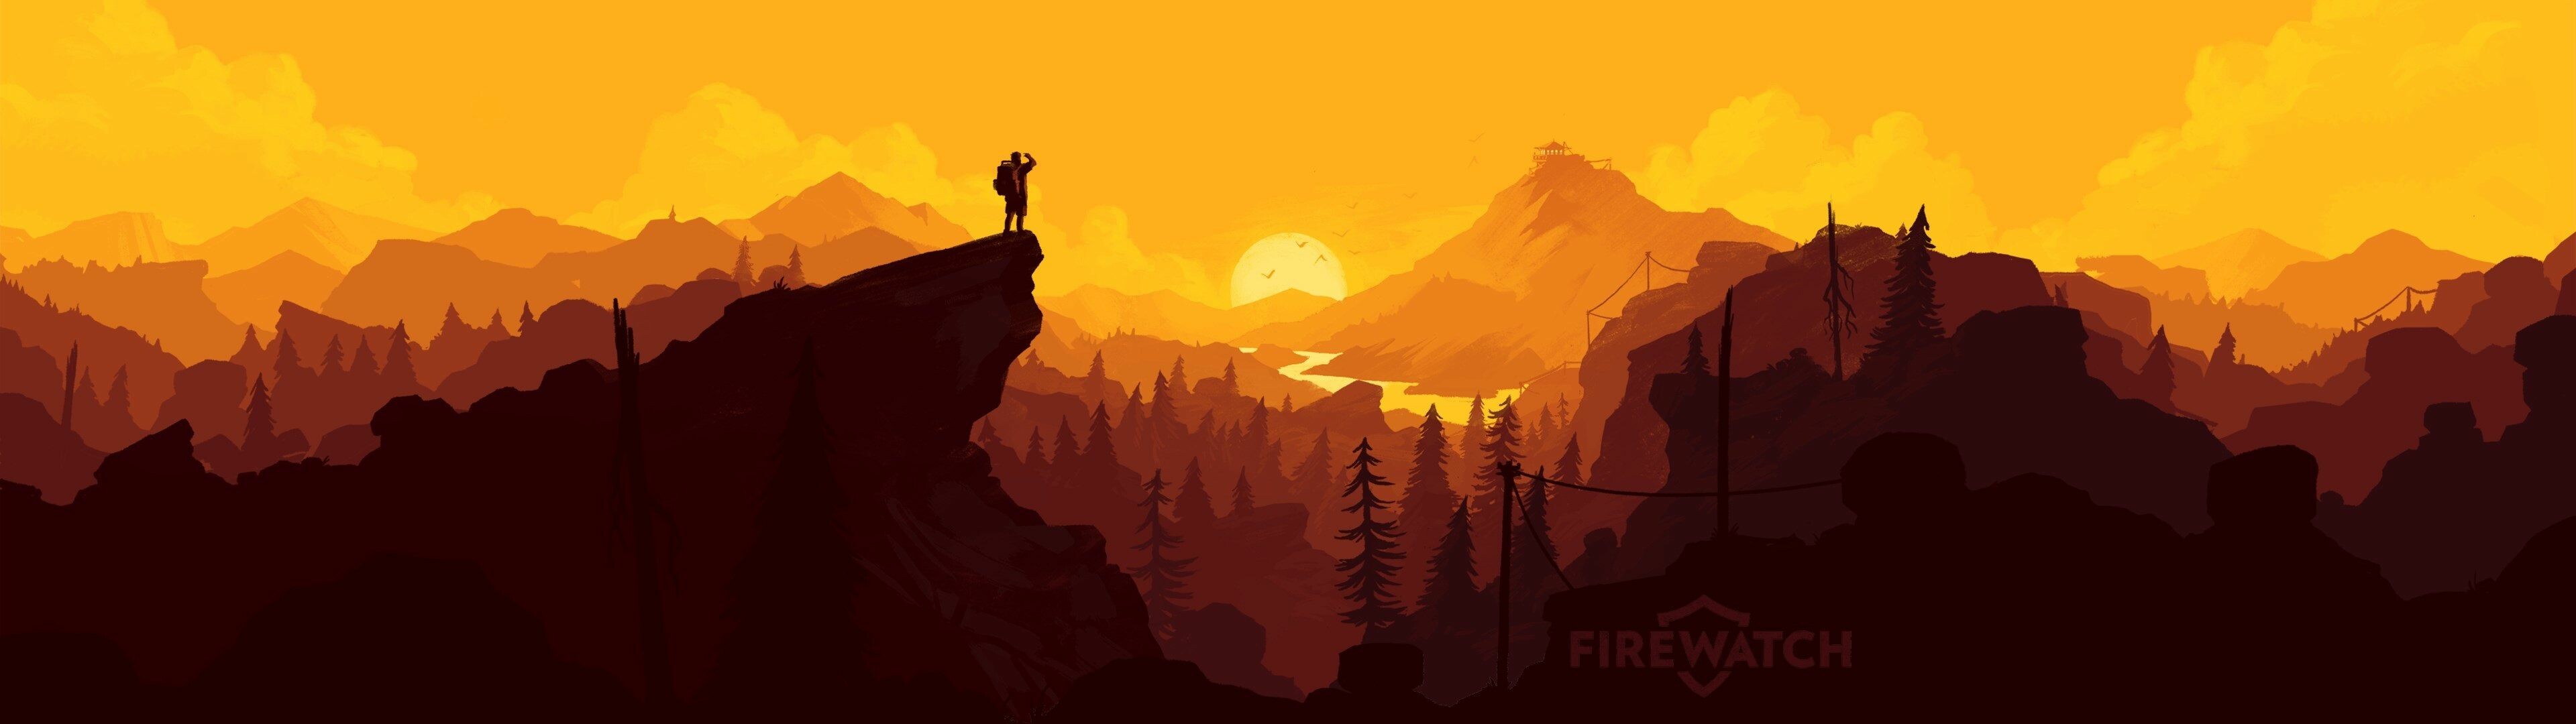 Firewatch: As the story progresses, new areas will be opened up for players, and certain events are set at different times of the day. 3840x1080 Dual Screen Wallpaper.